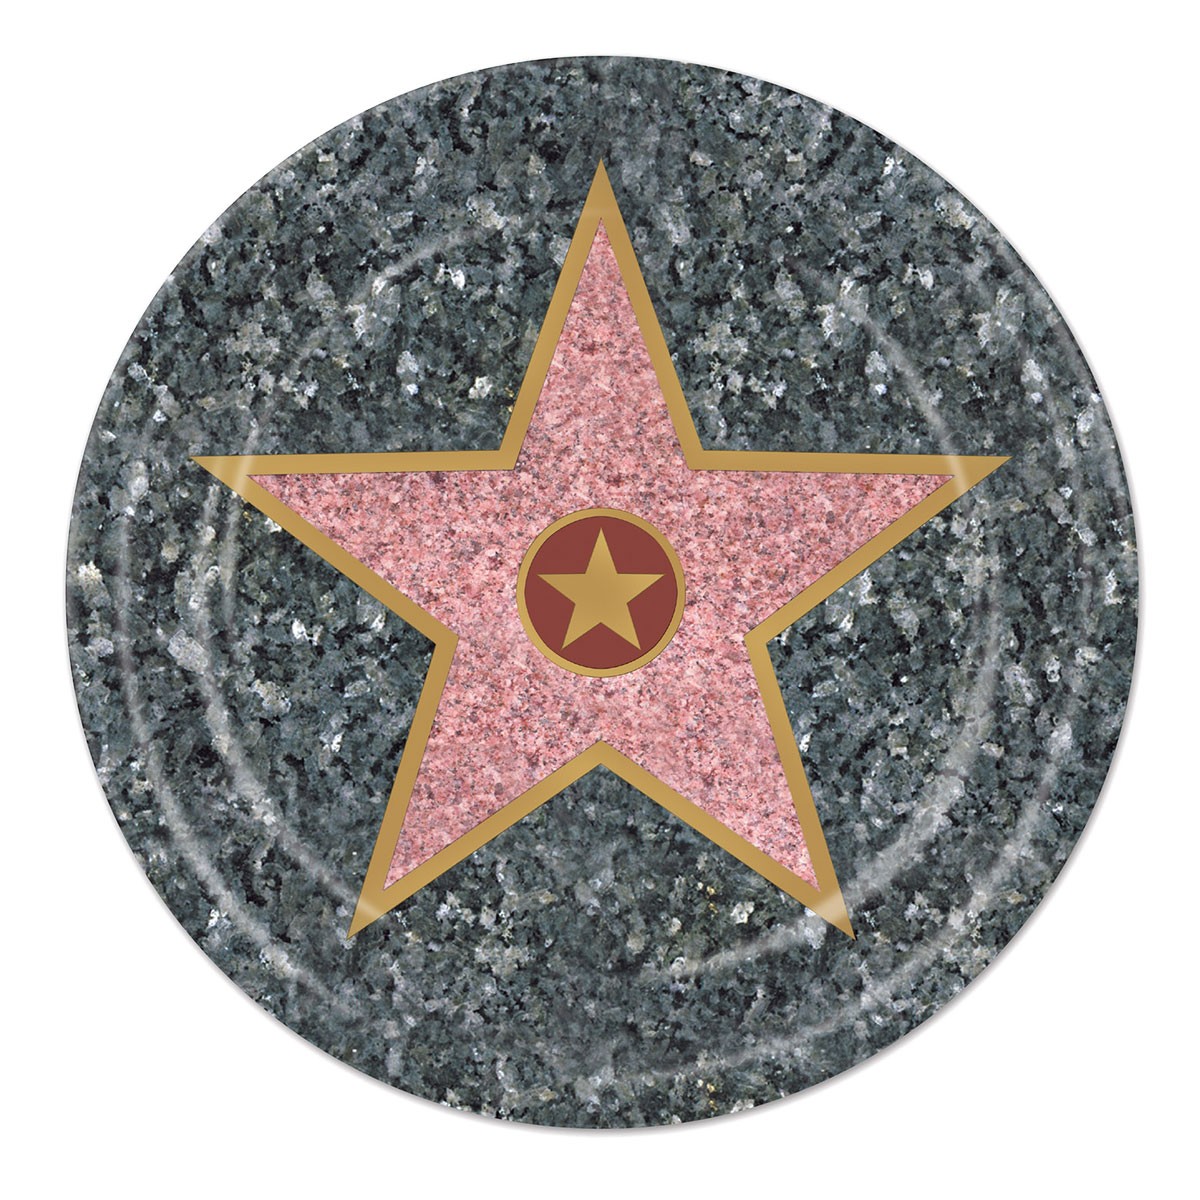 Walk of Fame Star 7" Plates- 8 Pack